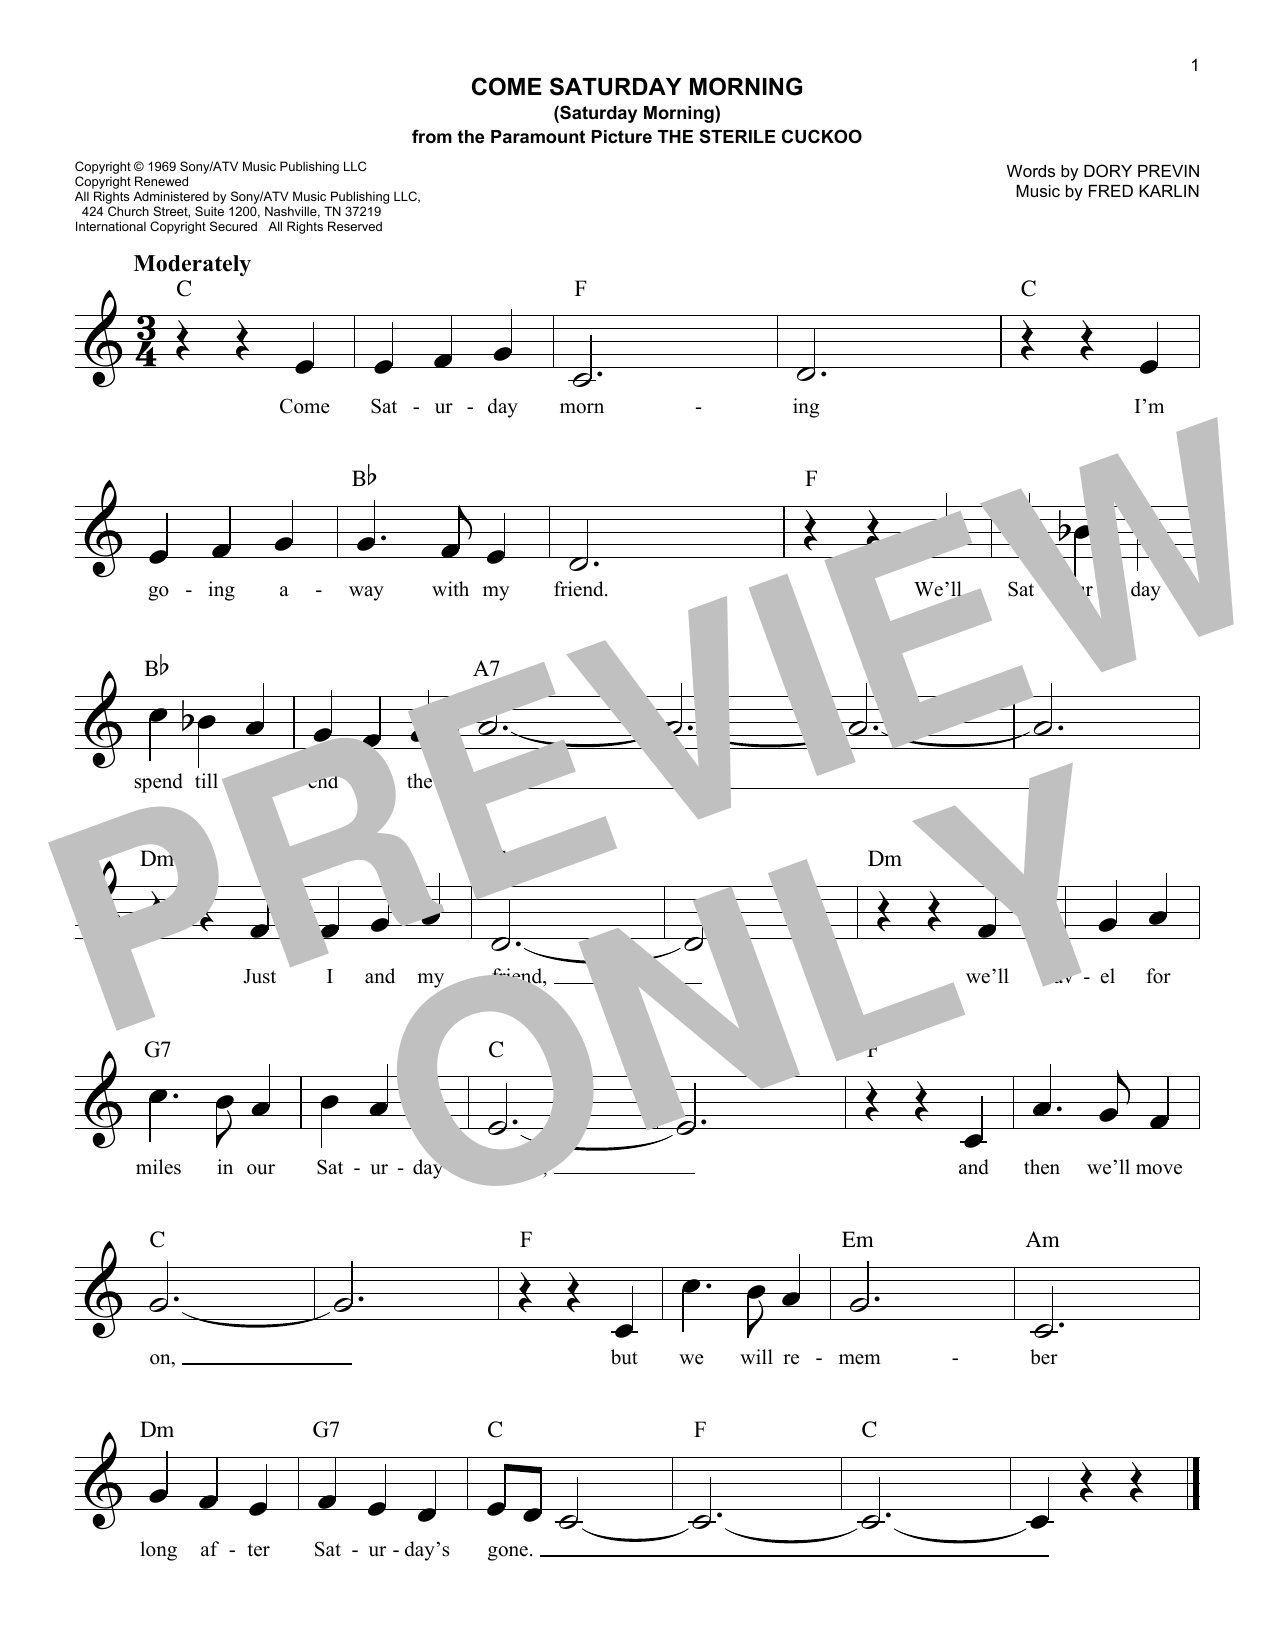 Download The Sandpipers Come Saturday Morning (Saturday Morning Sheet Music